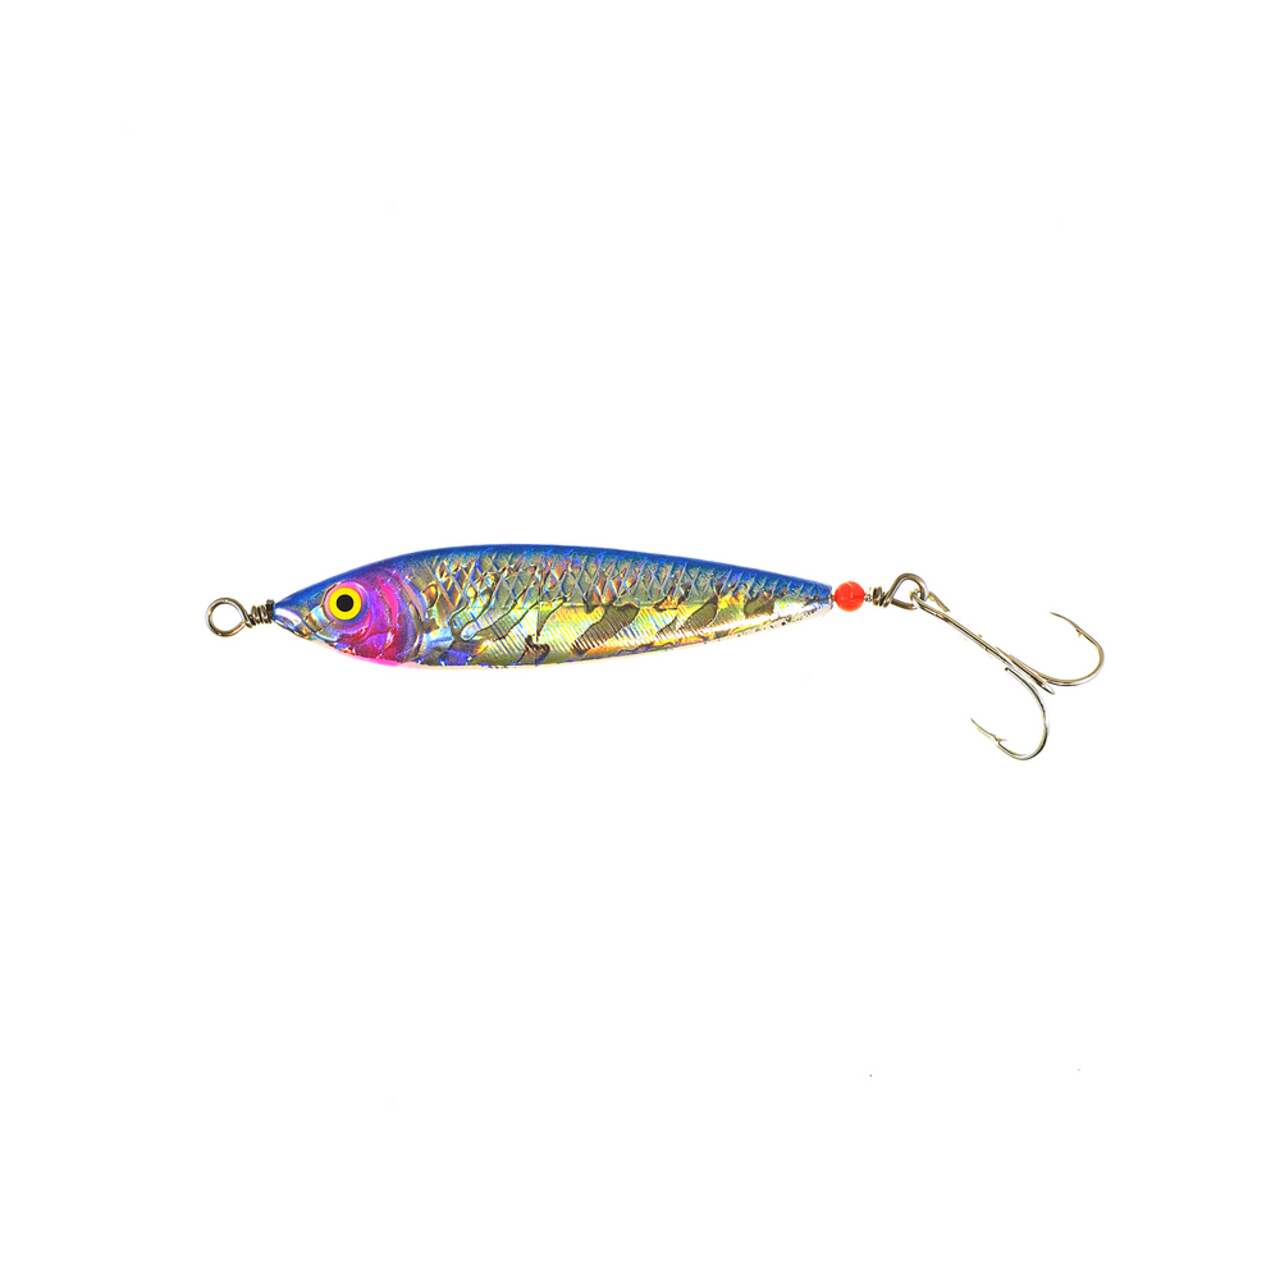 https://media-www.canadiantire.ca/product/playing/fishing/fishing-lures/0773051/buzzbomb-spinnow-lure-blue-1-5oz-0cce3768-067c-4829-a489-345081112eb8.png?imdensity=1&imwidth=1244&impolicy=mZoom